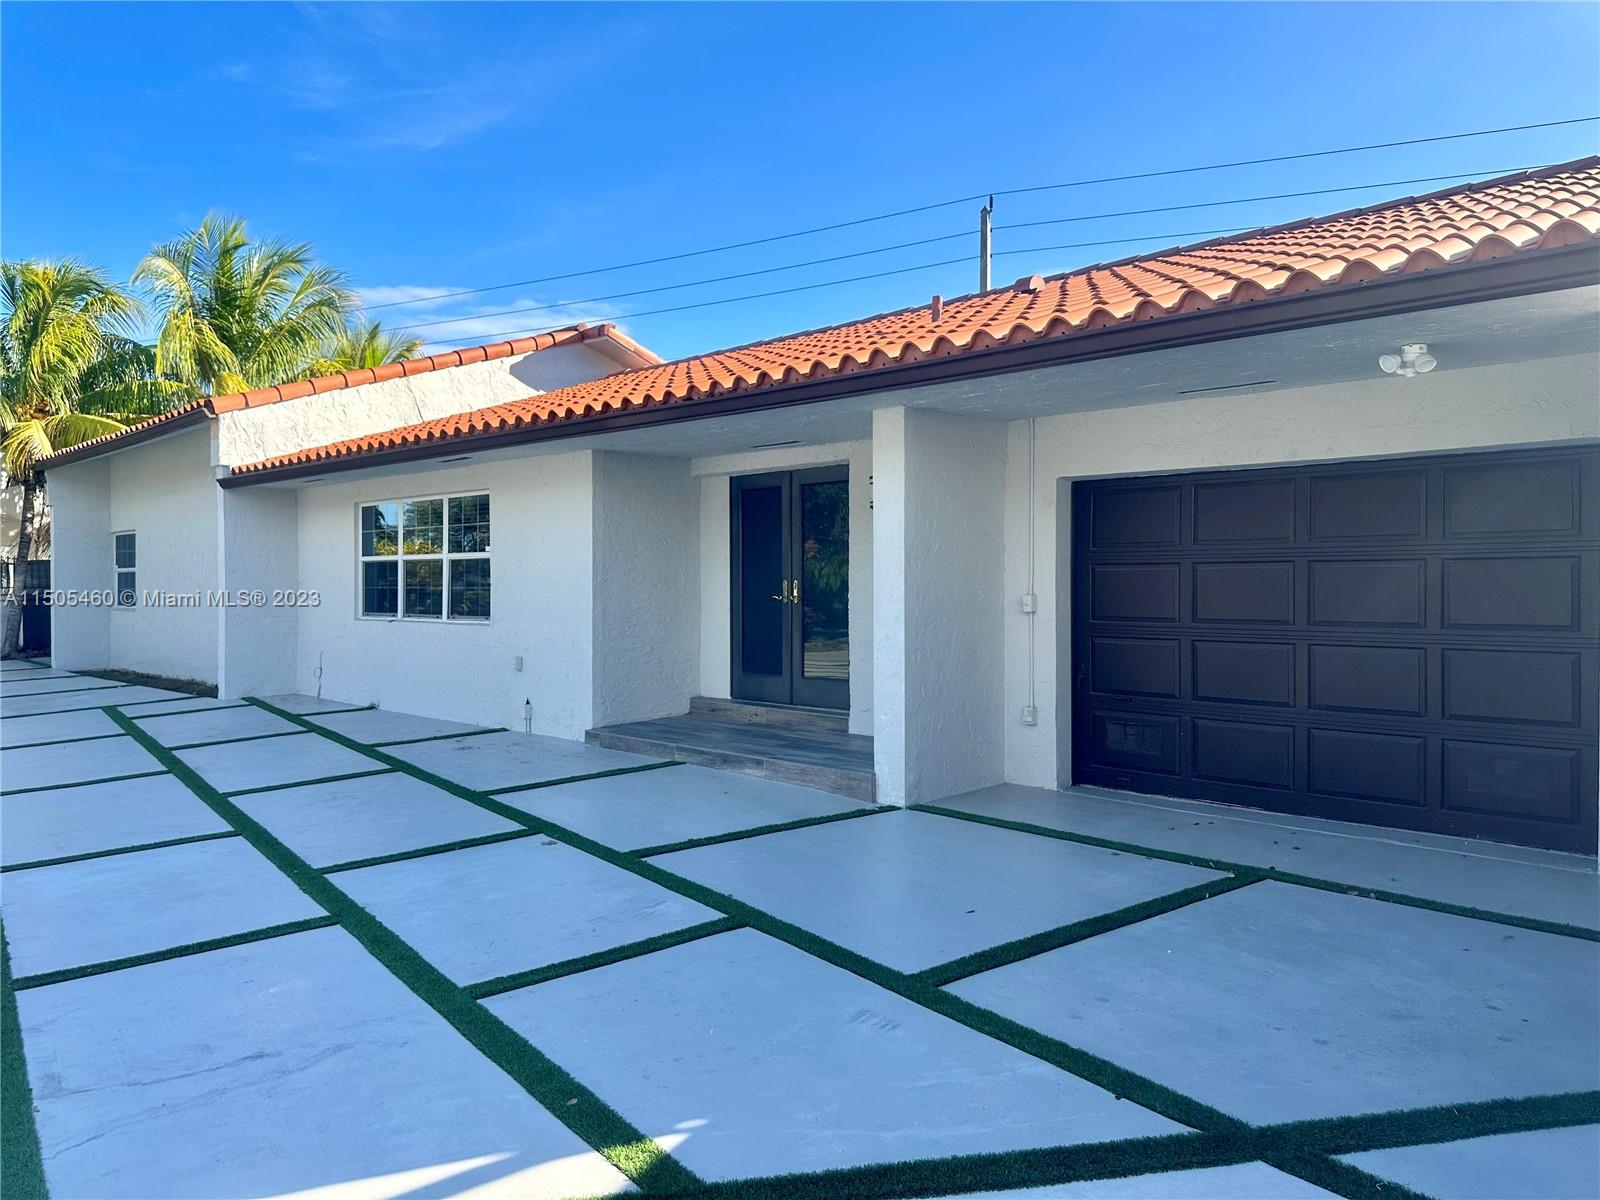 14520 SW 71st Ln, Miami, Florida 33183, 5 Bedrooms Bedrooms, ,3 BathroomsBathrooms,Residential,For Sale,14520 SW 71st Ln,A11505460